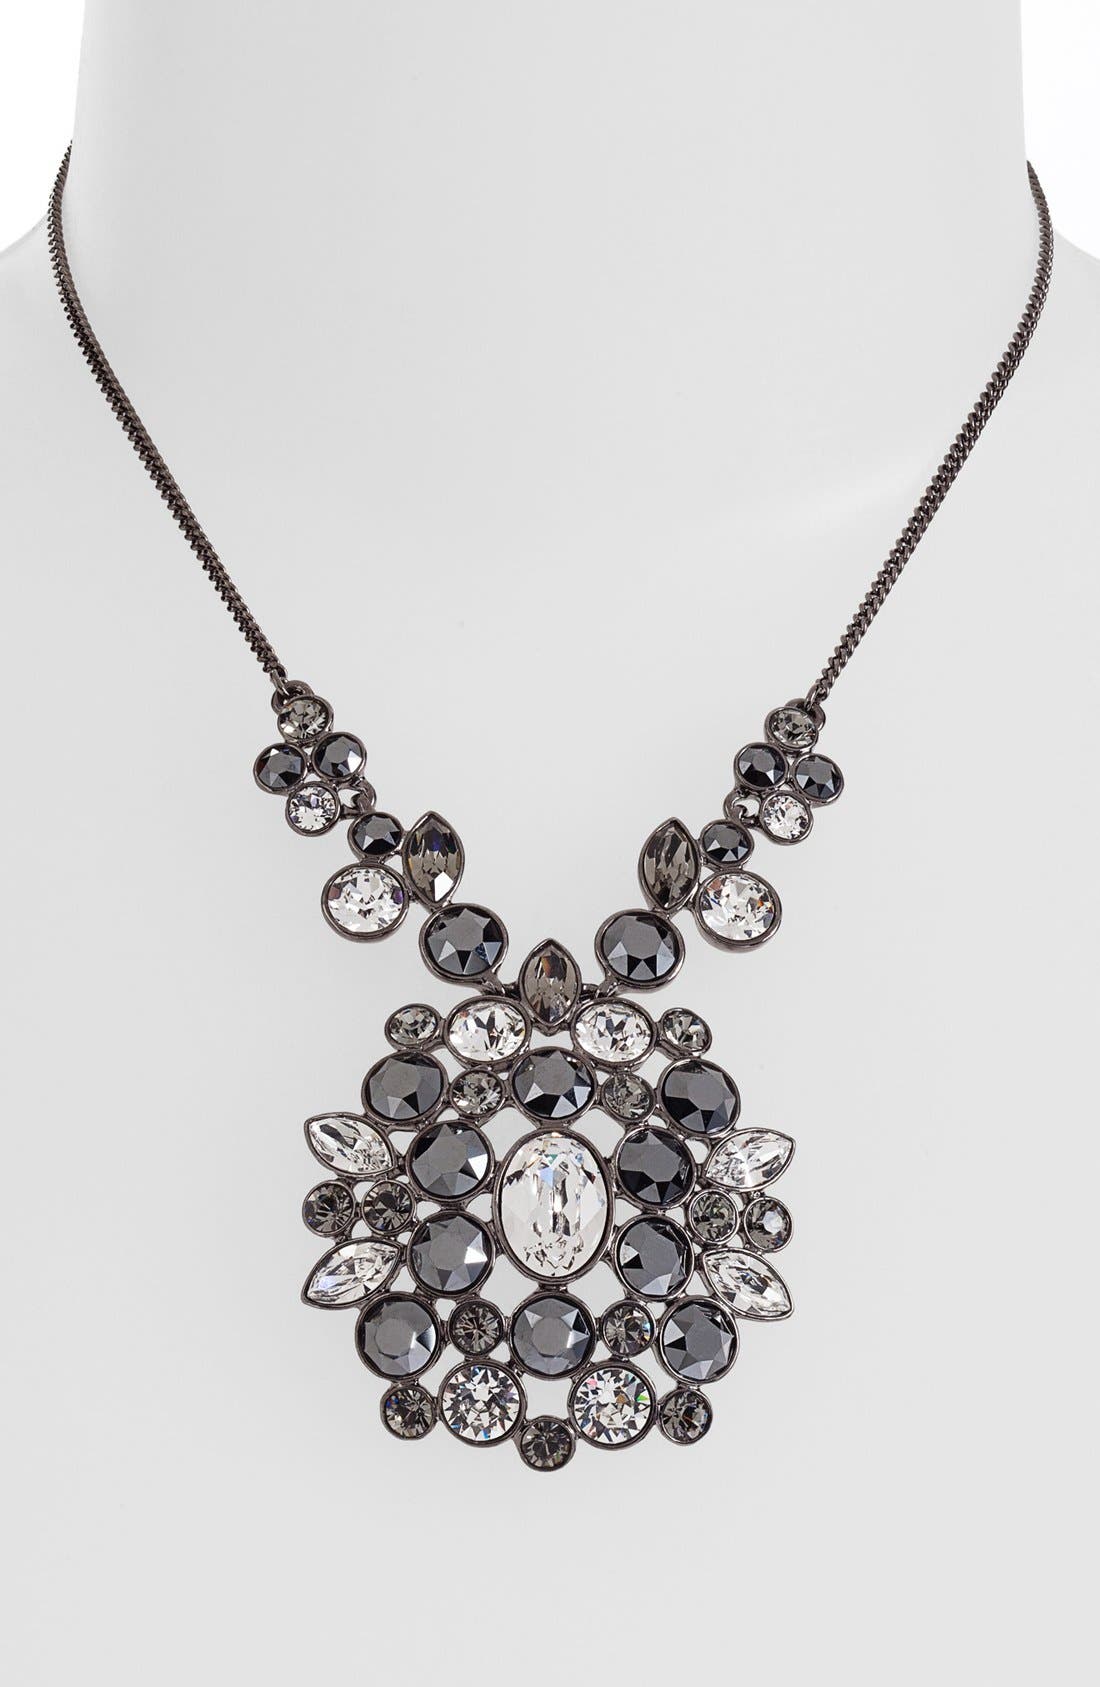 givenchy statement necklace